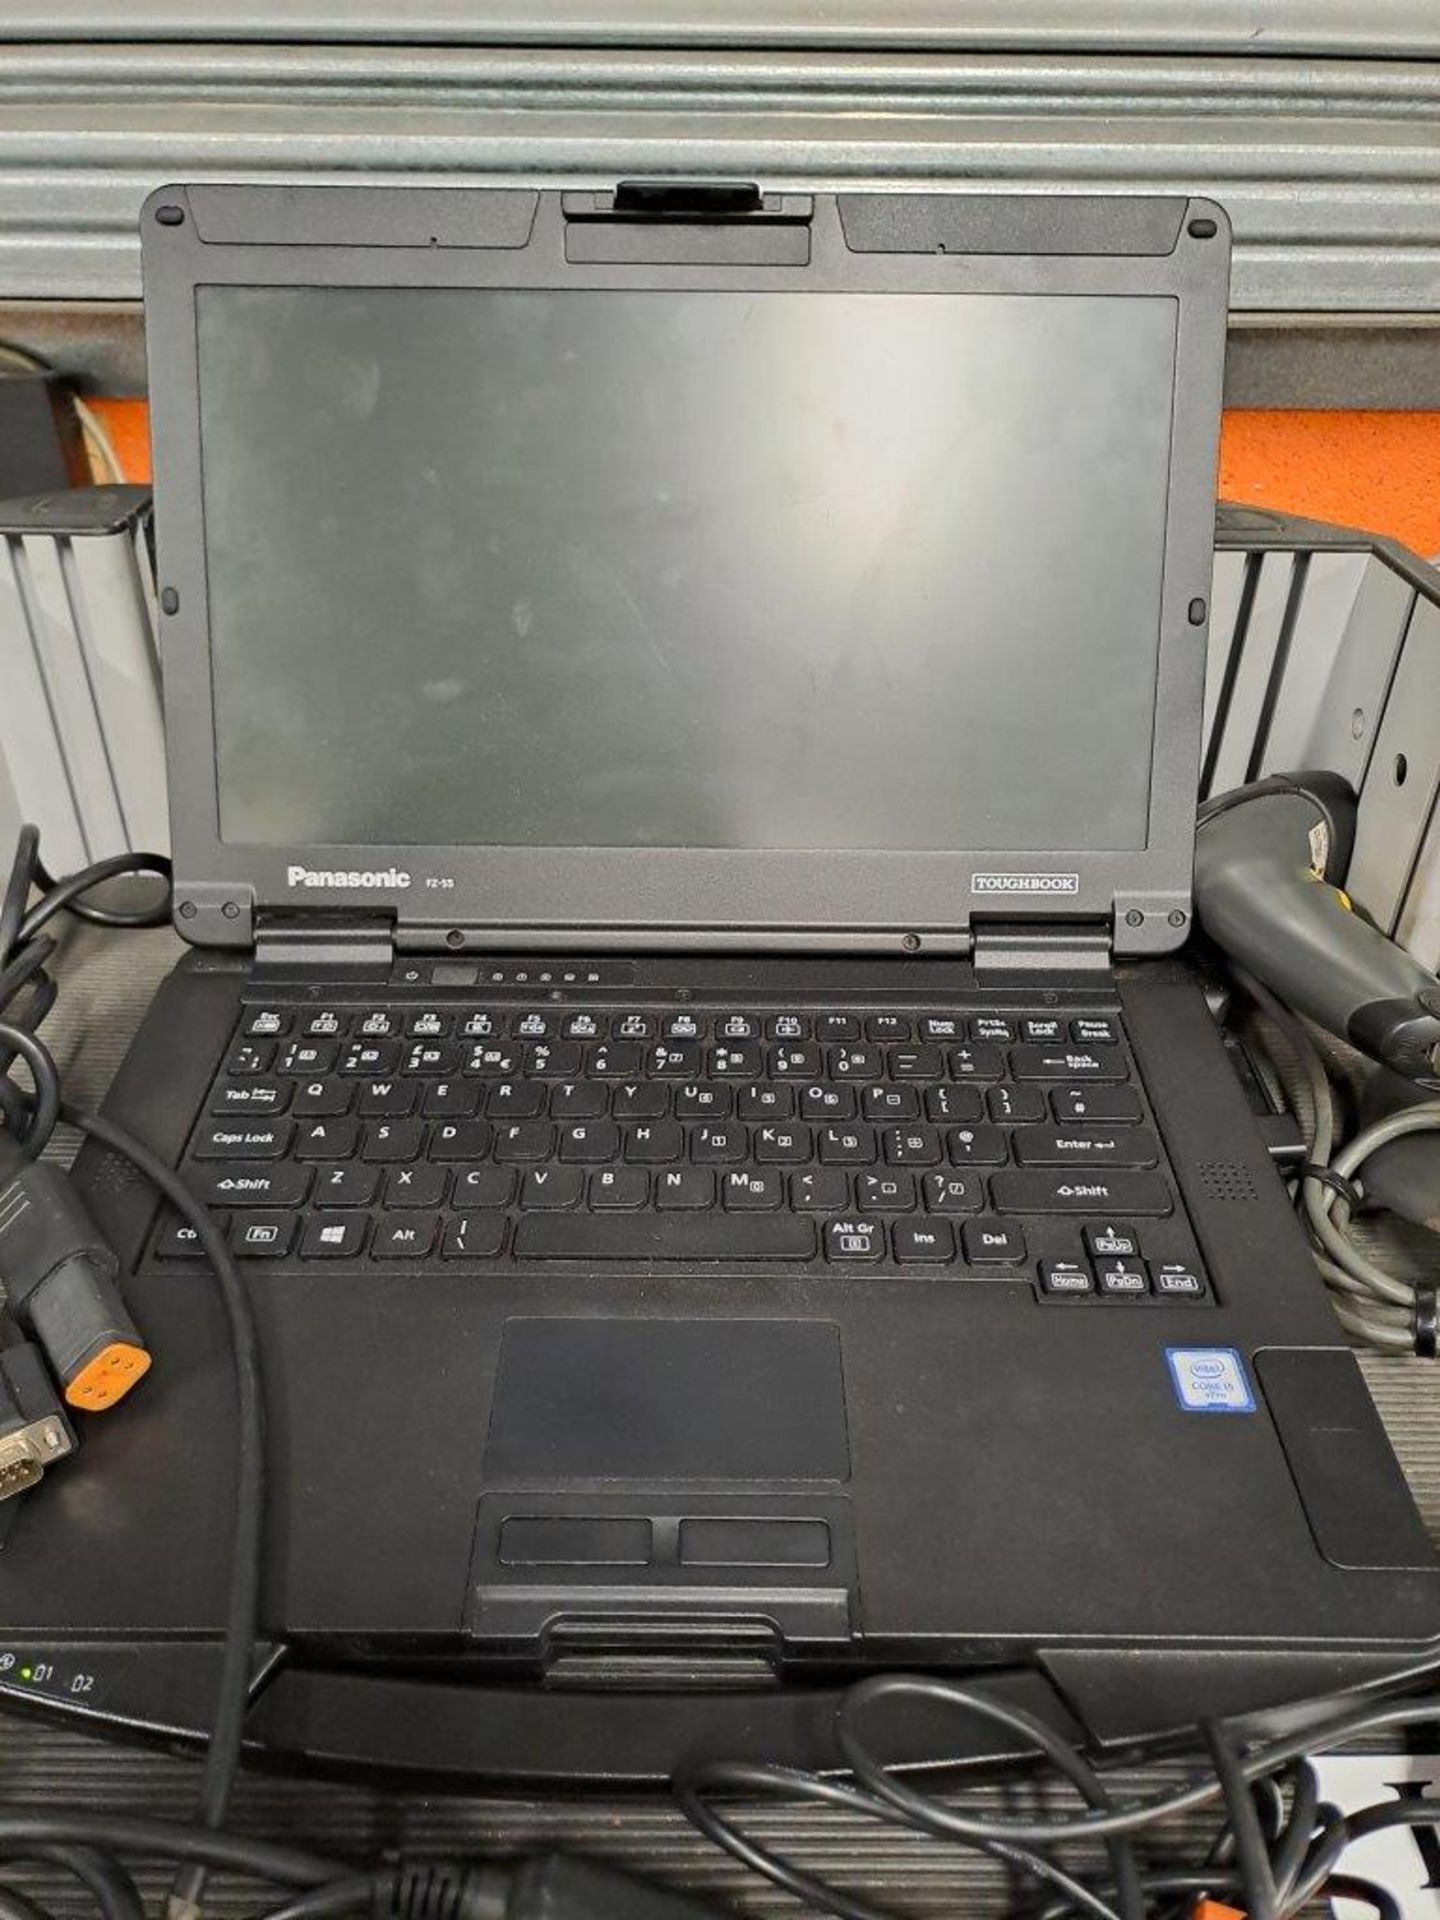 Panasonic FZ-55 Toughbook on Mobile - Techlink II Diagnostic and Mobile Stand - Image 4 of 6